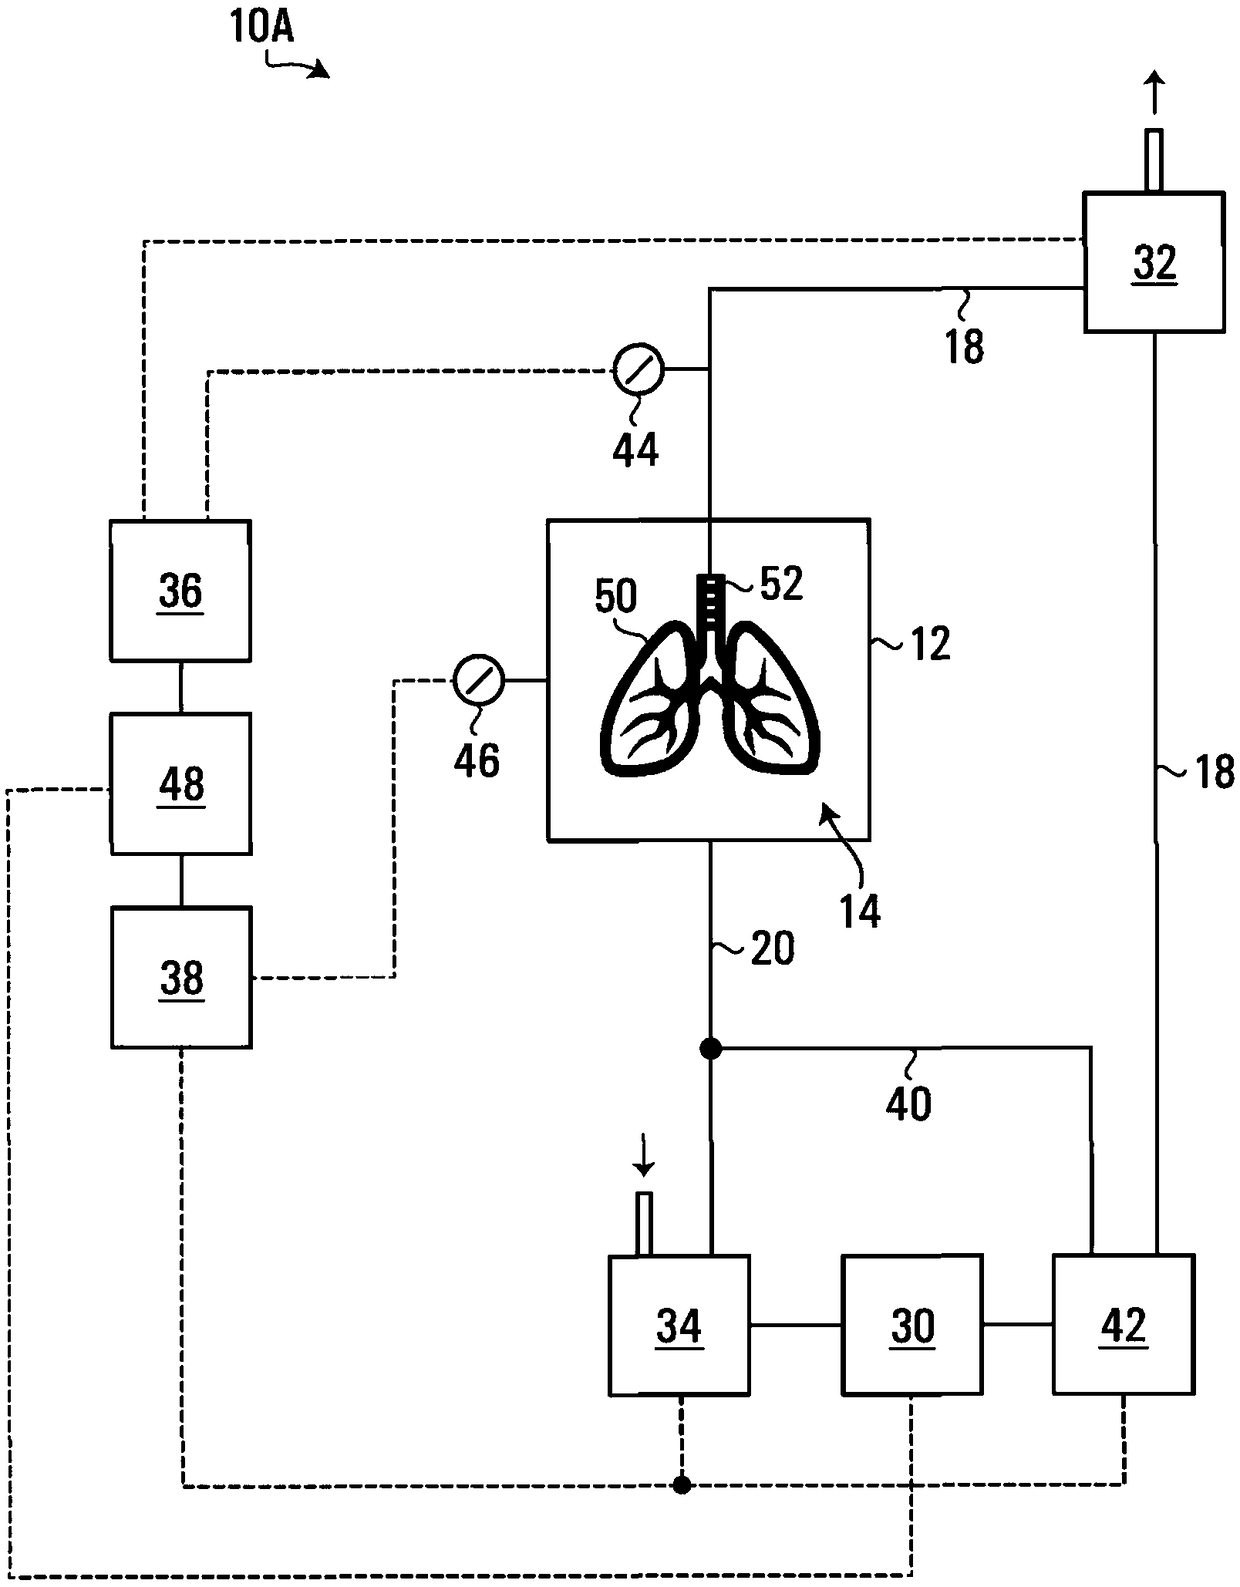 Apparatus and method for ex vivo lung ventilation with a varying exterior pressure